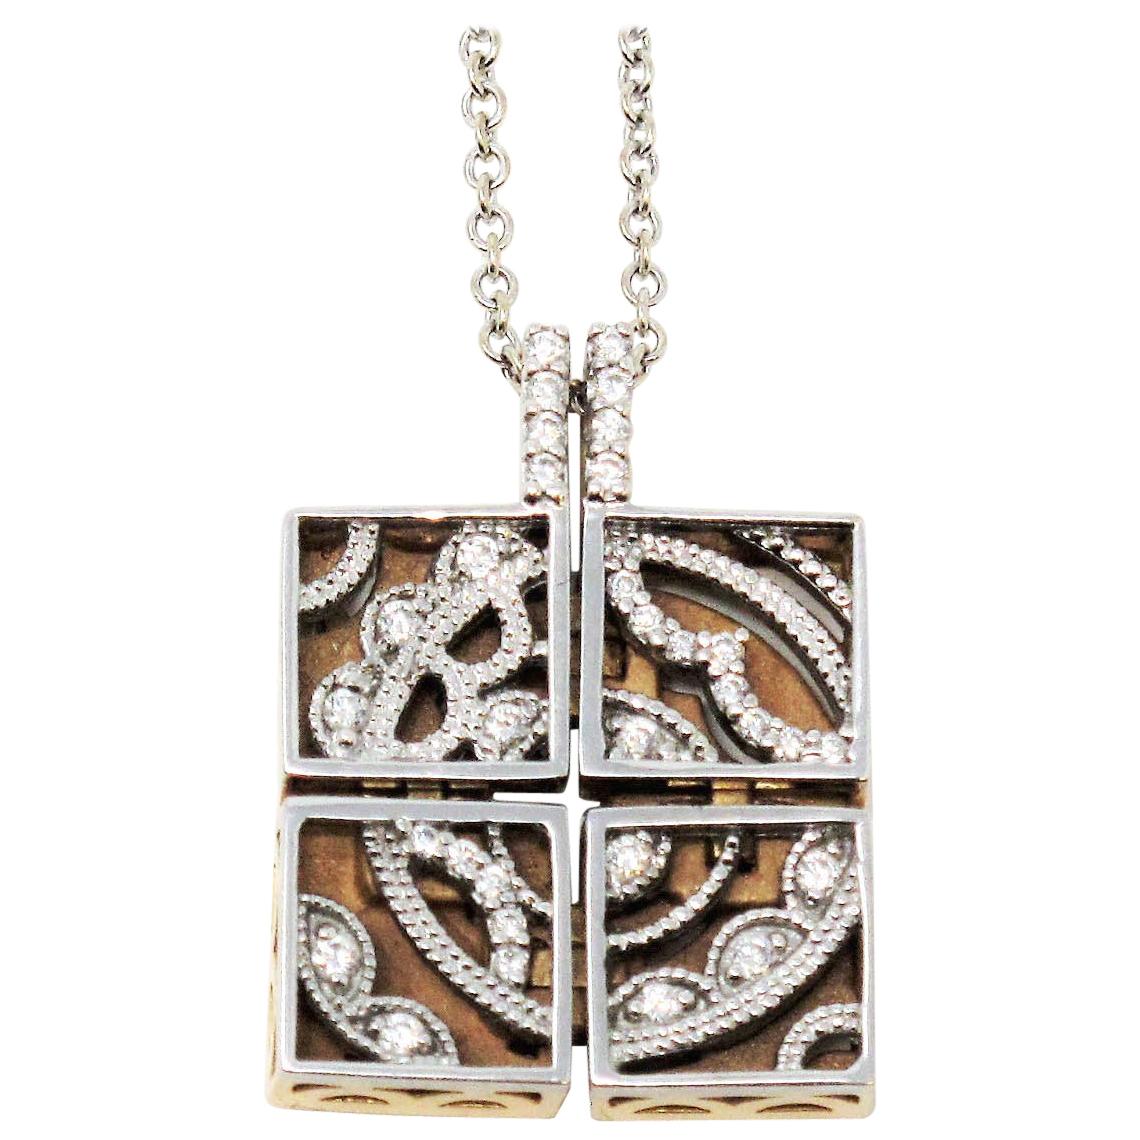 Tacori Diamond Sectioned Square Pendant Necklace in 18 Karat White and Rose Gold